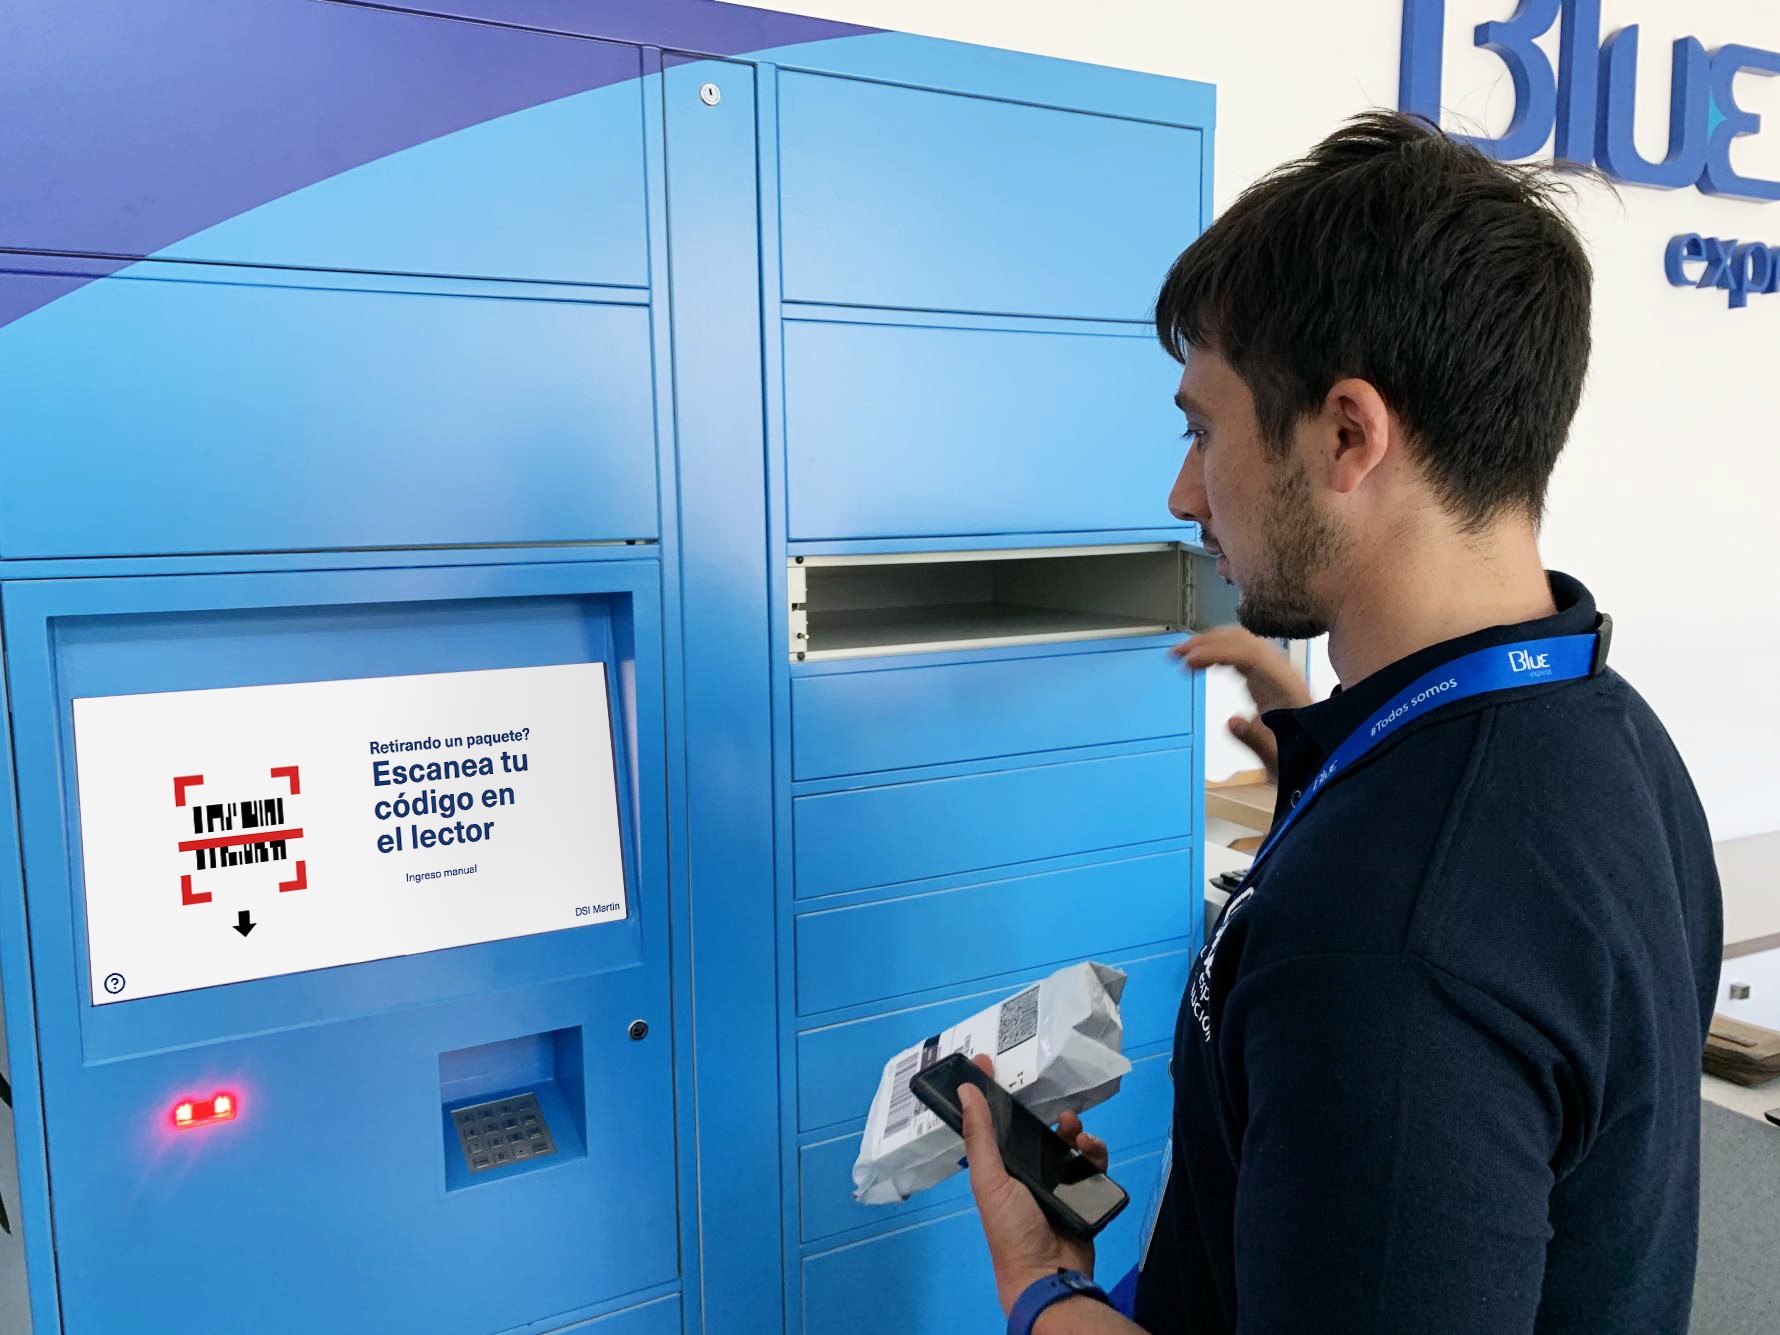 A customer picking up their package from a Maletek locker.